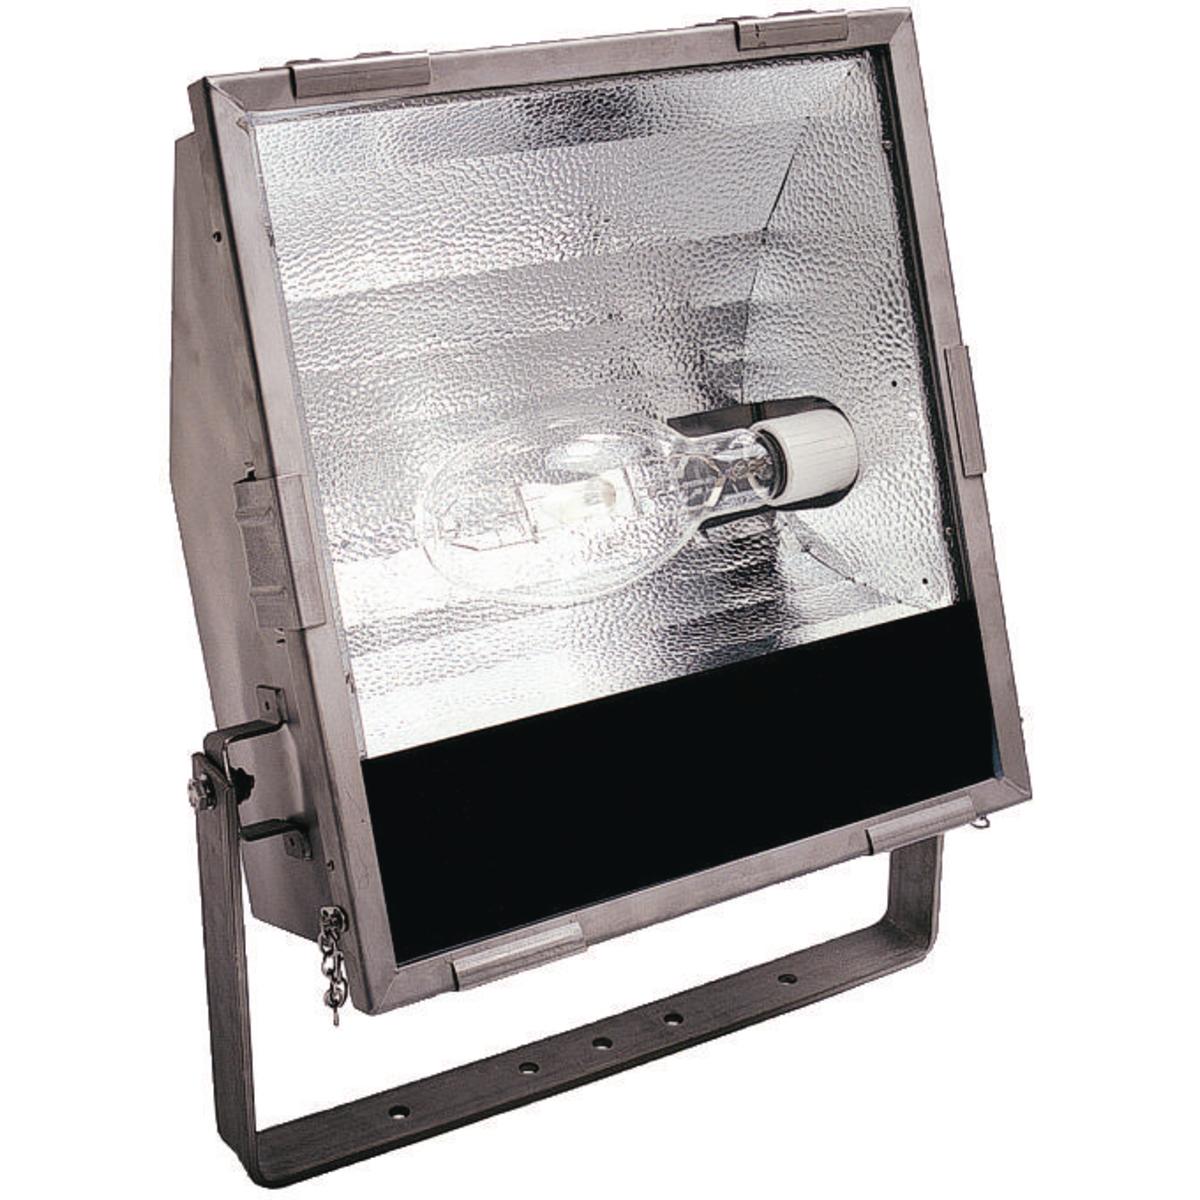 Hubbell KFS258SS KFSS Series - Stainless Steel 250 Watt High Pressure Sodium Marine Floodlight (Lamp Not Included) - 220/240V At 60Hz  ; Type 316 Stainless Steel Housing. 16-gauge housing ensures low corrosion and long life, reducing maintenance costs ; Rugged quick-relea